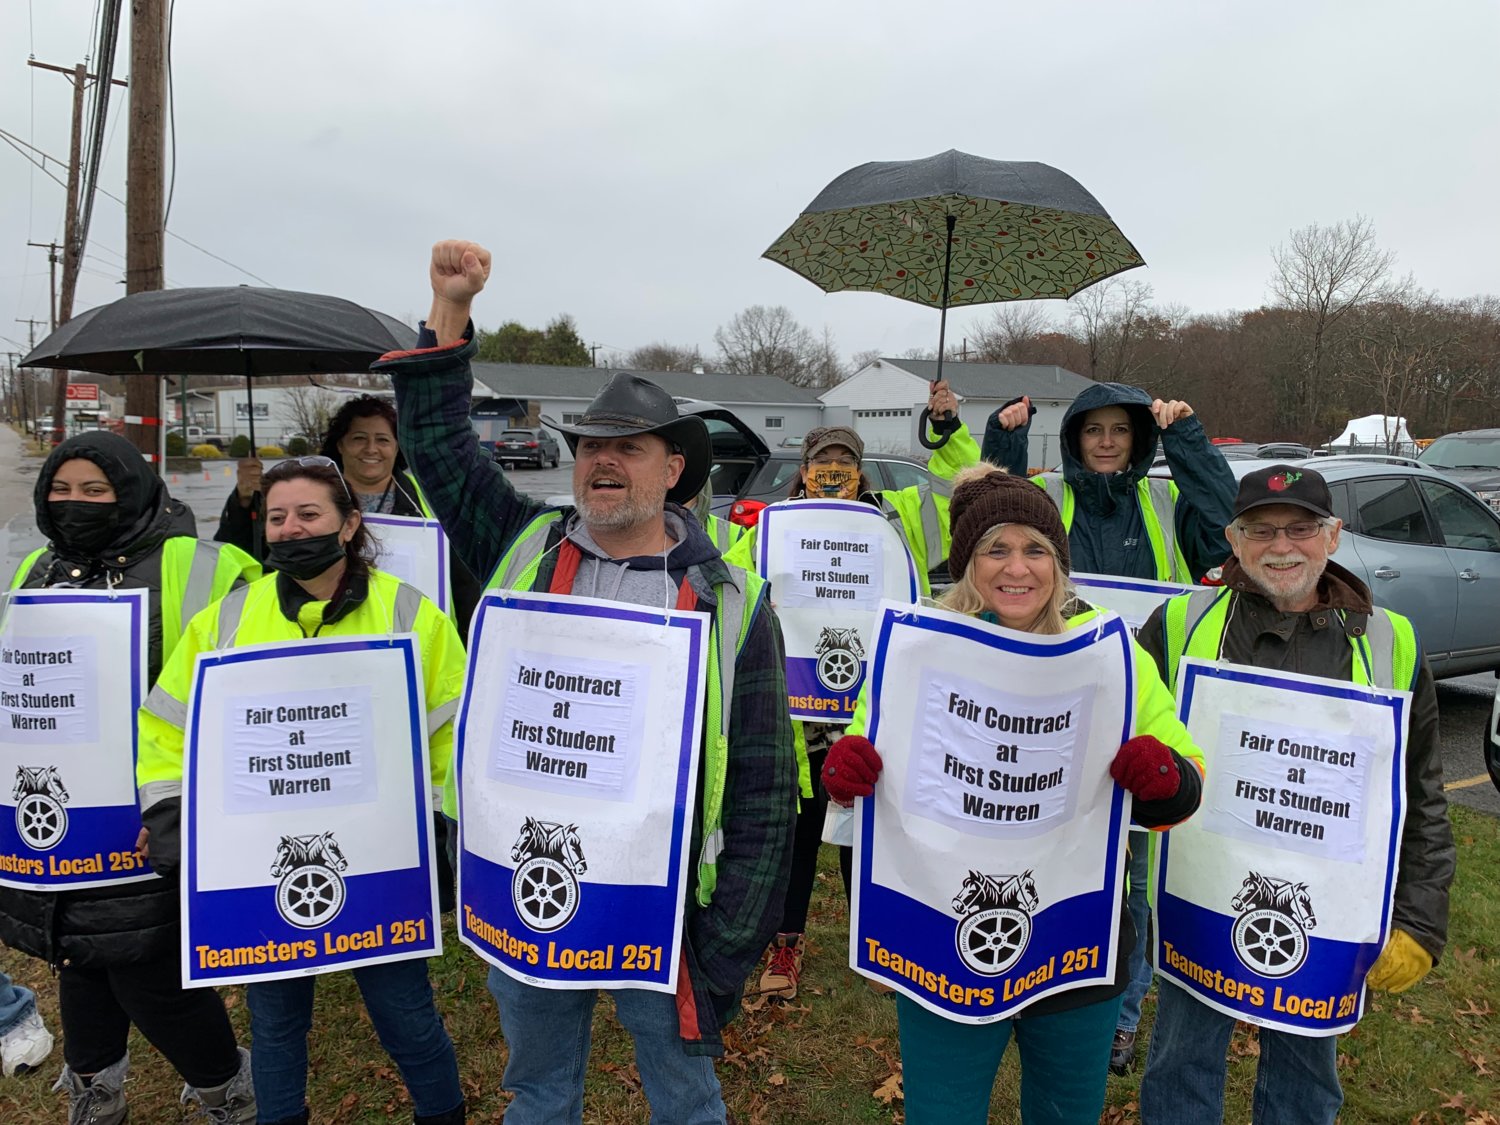 Steven King, joined by fellow members of Teamsters Local 251, raises his fist during an informational picket held outside of the First Student depot in Warren on Monday morning.